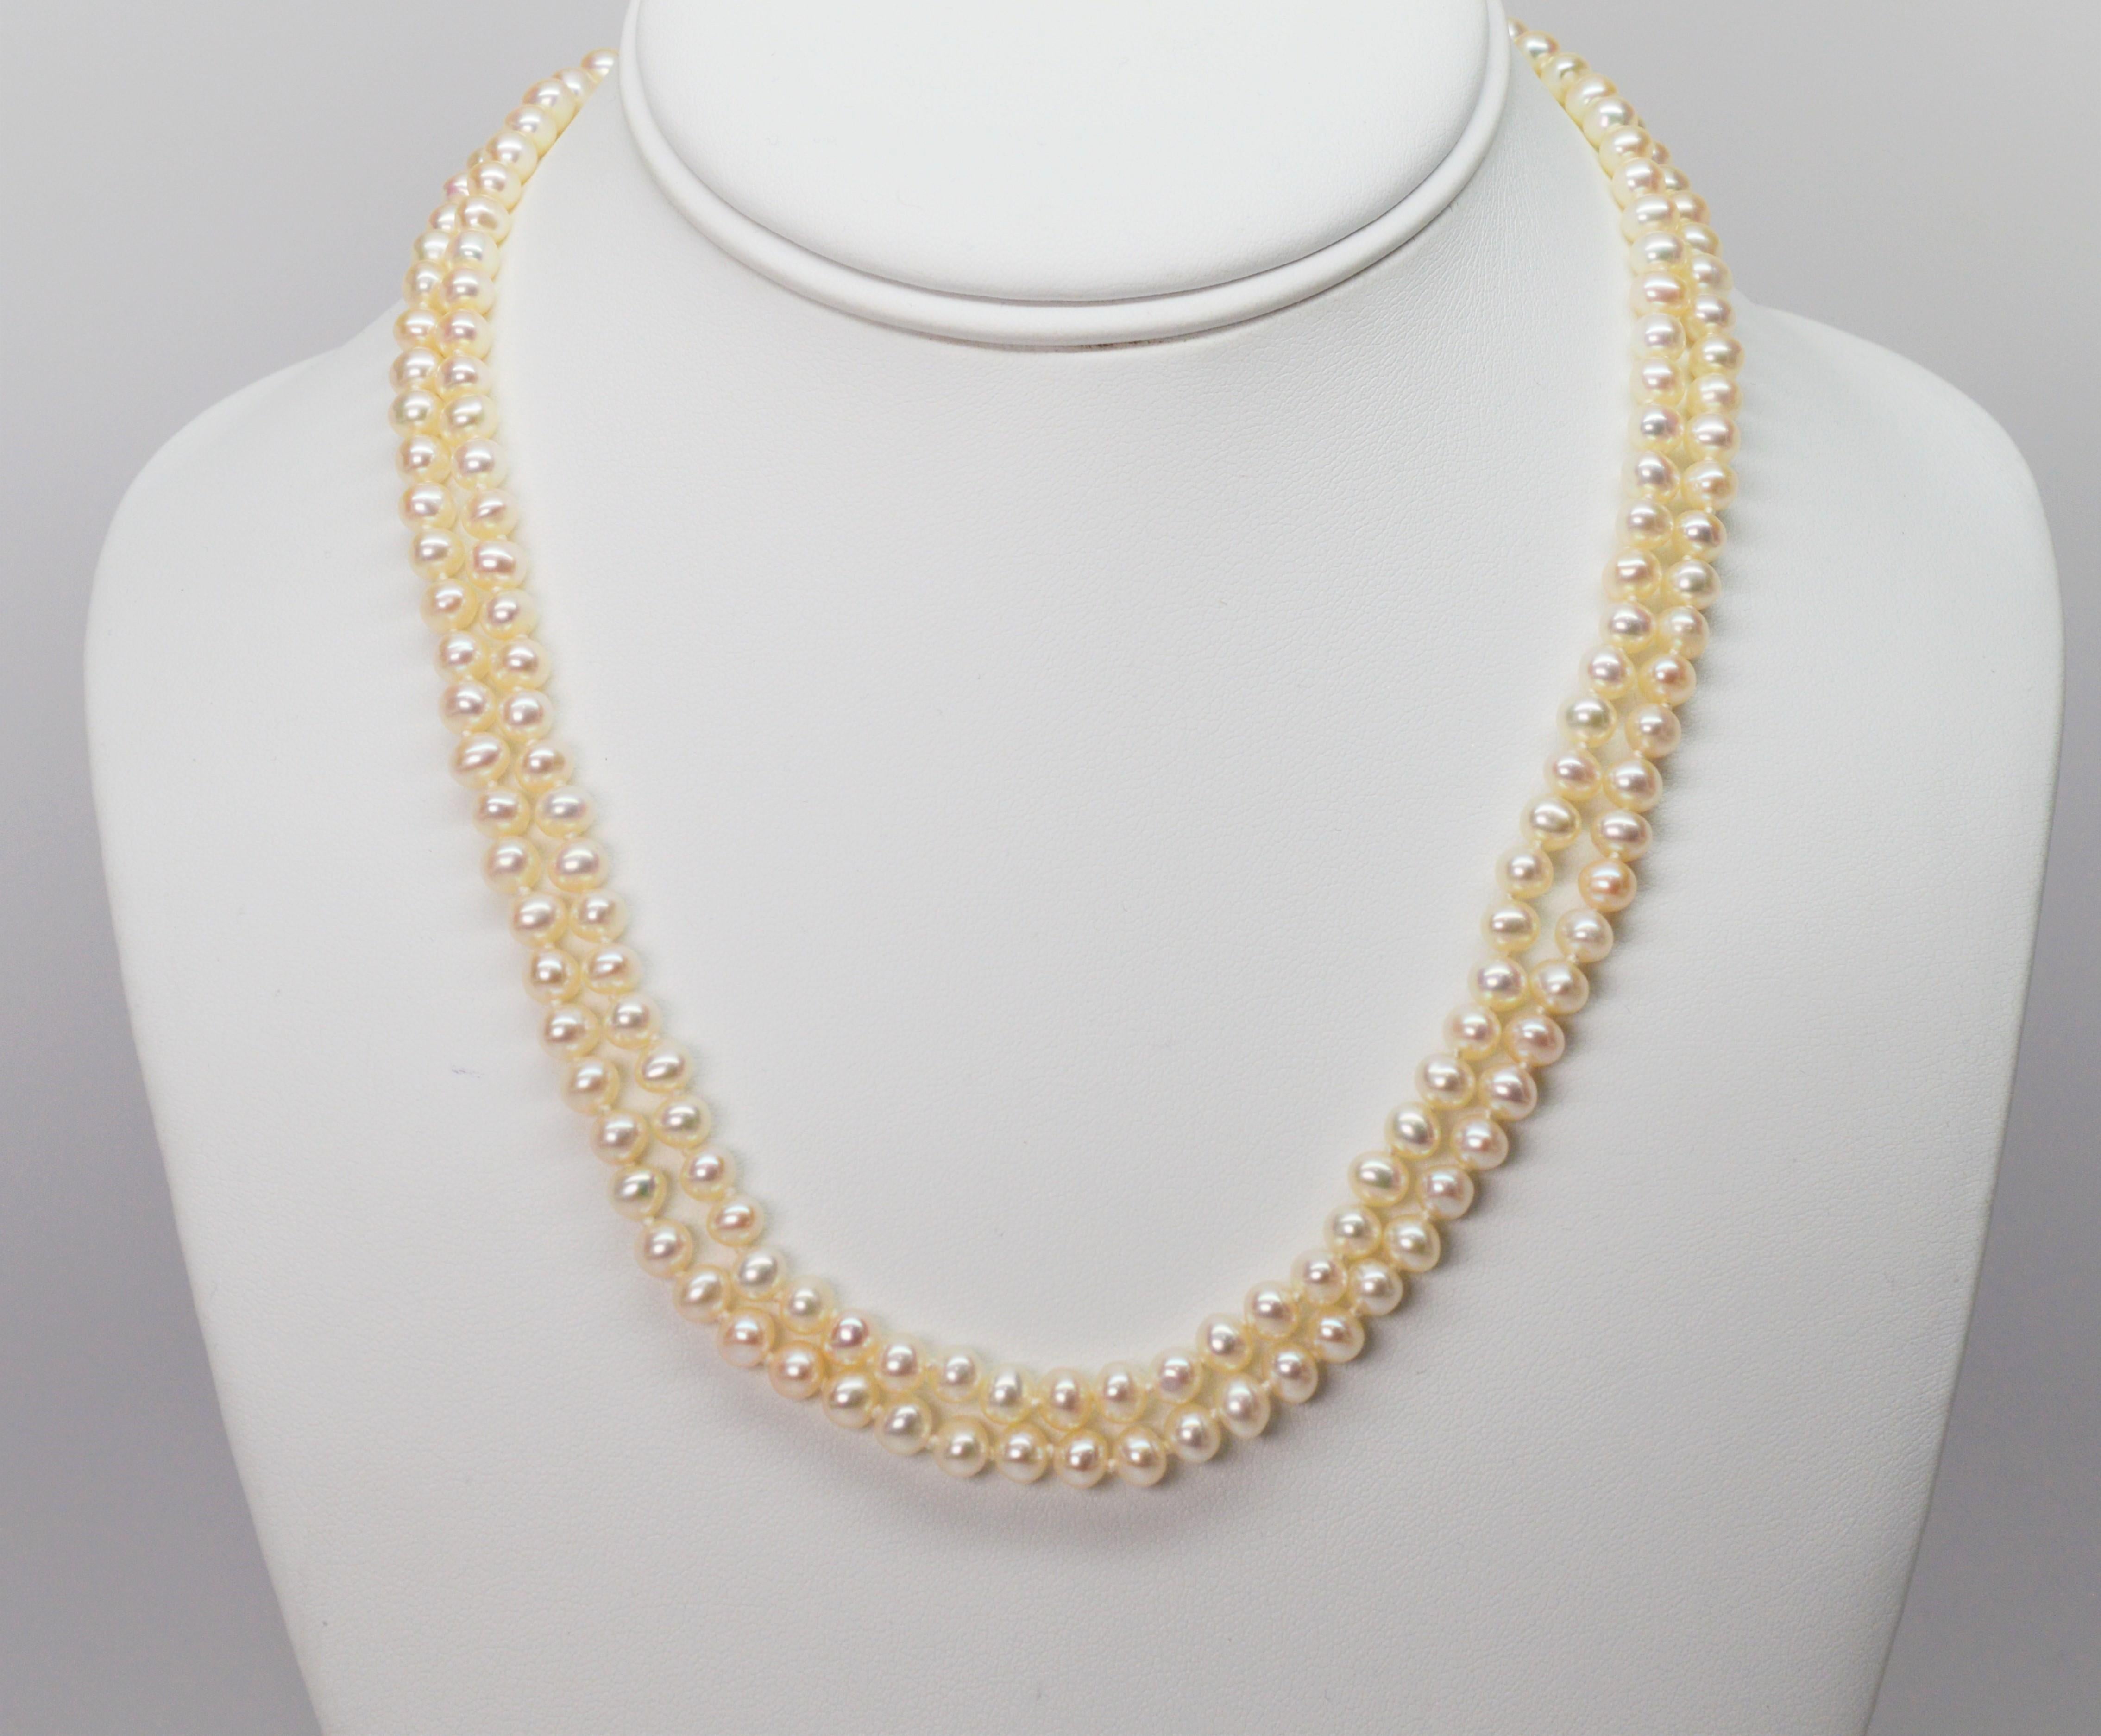 Find simple elegance in this classic duo. Two hundred thirty two fine off-round 5.5 mm AA button Akoya pearls are hand strung and knotted to create this double necklace and bracelet. Each piece is finished with a decorative filigree box clasp made